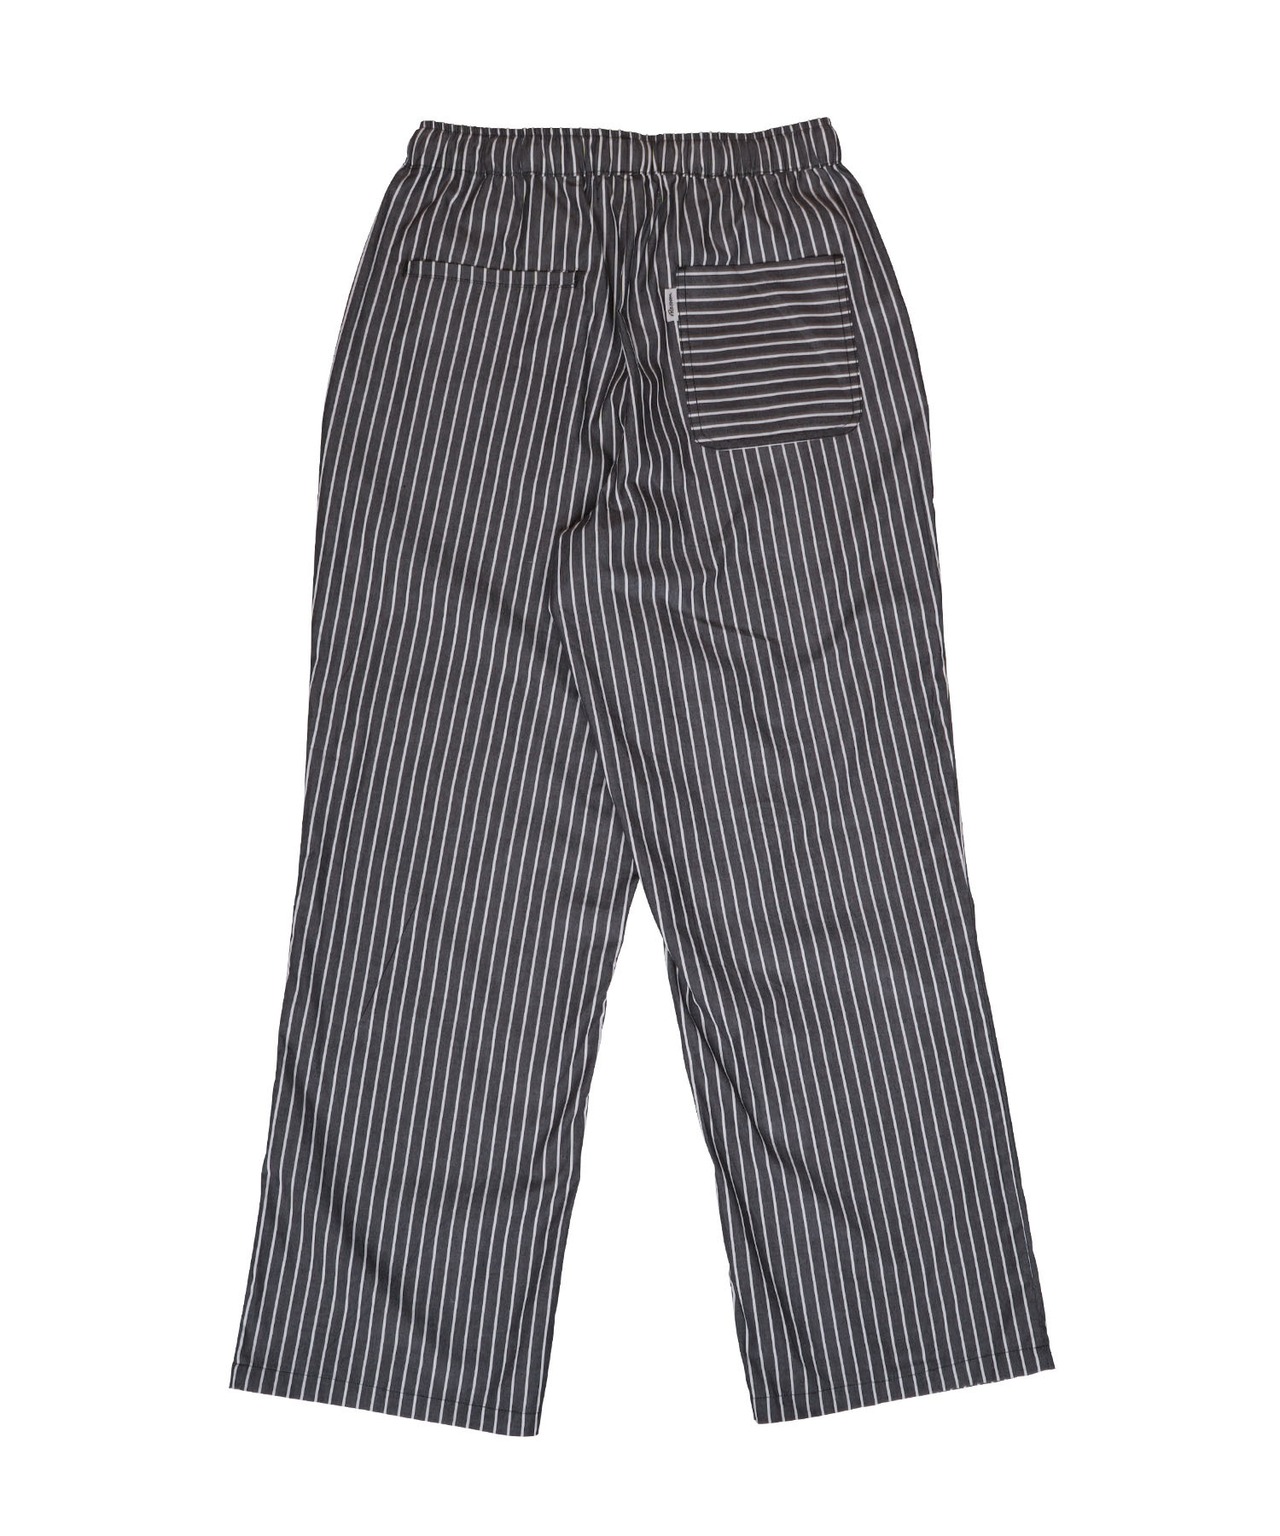 【#Re:room】PIN STRIPE RELAX WIDE PANTS［REP254］